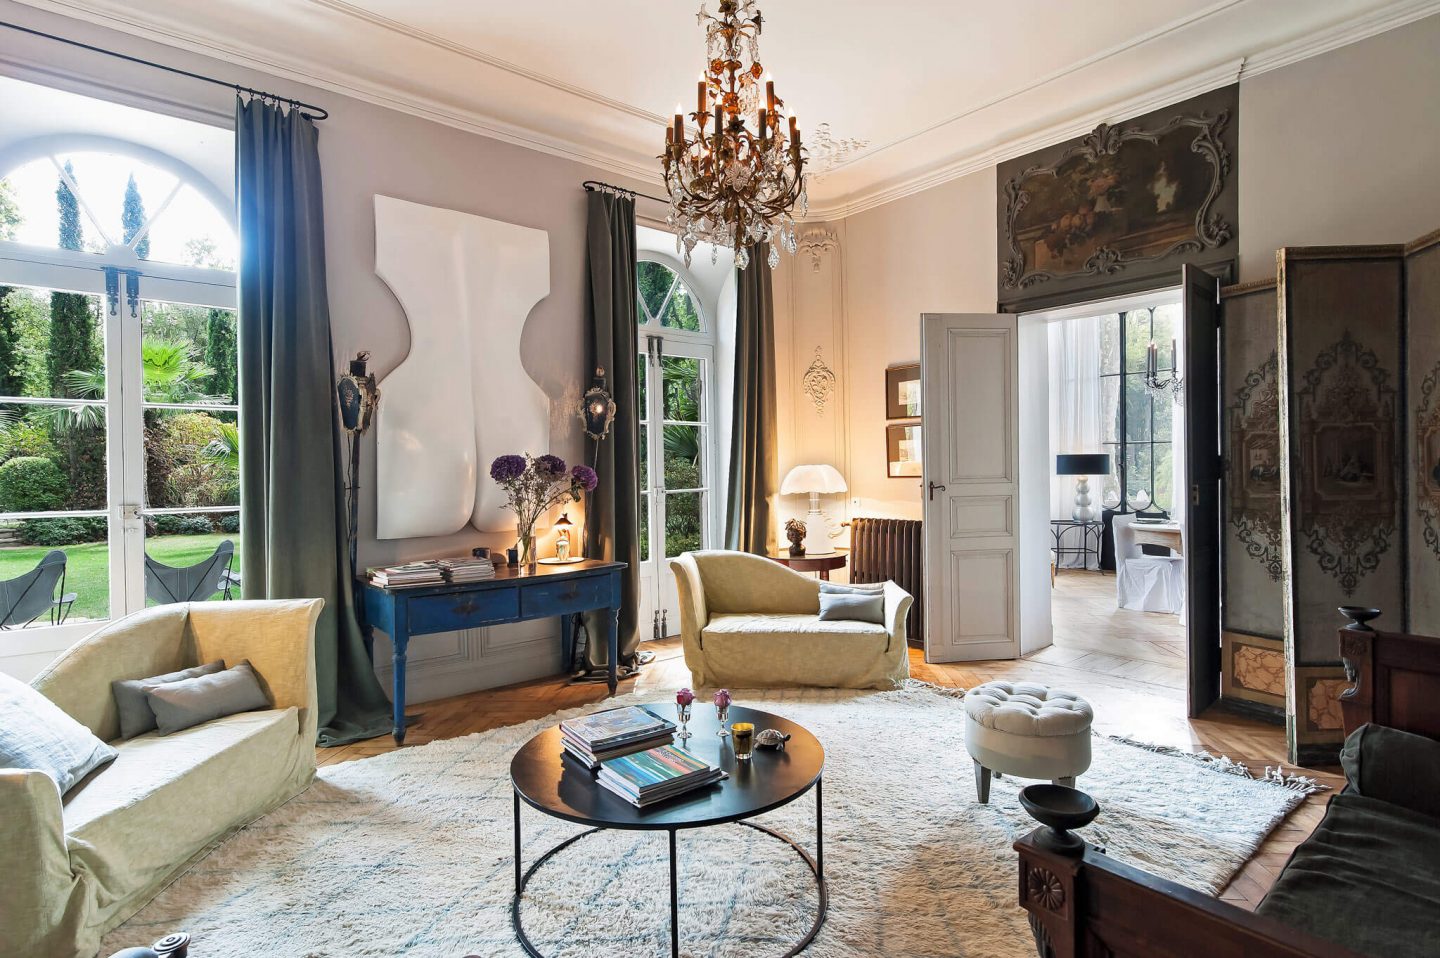 Inspiring interiors, gardens, and art within this restored French chateau Avignon Hotel Particulier. The Serenity Suite is available to book through Haven In...come take a peek! #frenchchateau #avignon #provence #provencal #housetour #french #home #mansion #luxuryhotel #luxuryhome